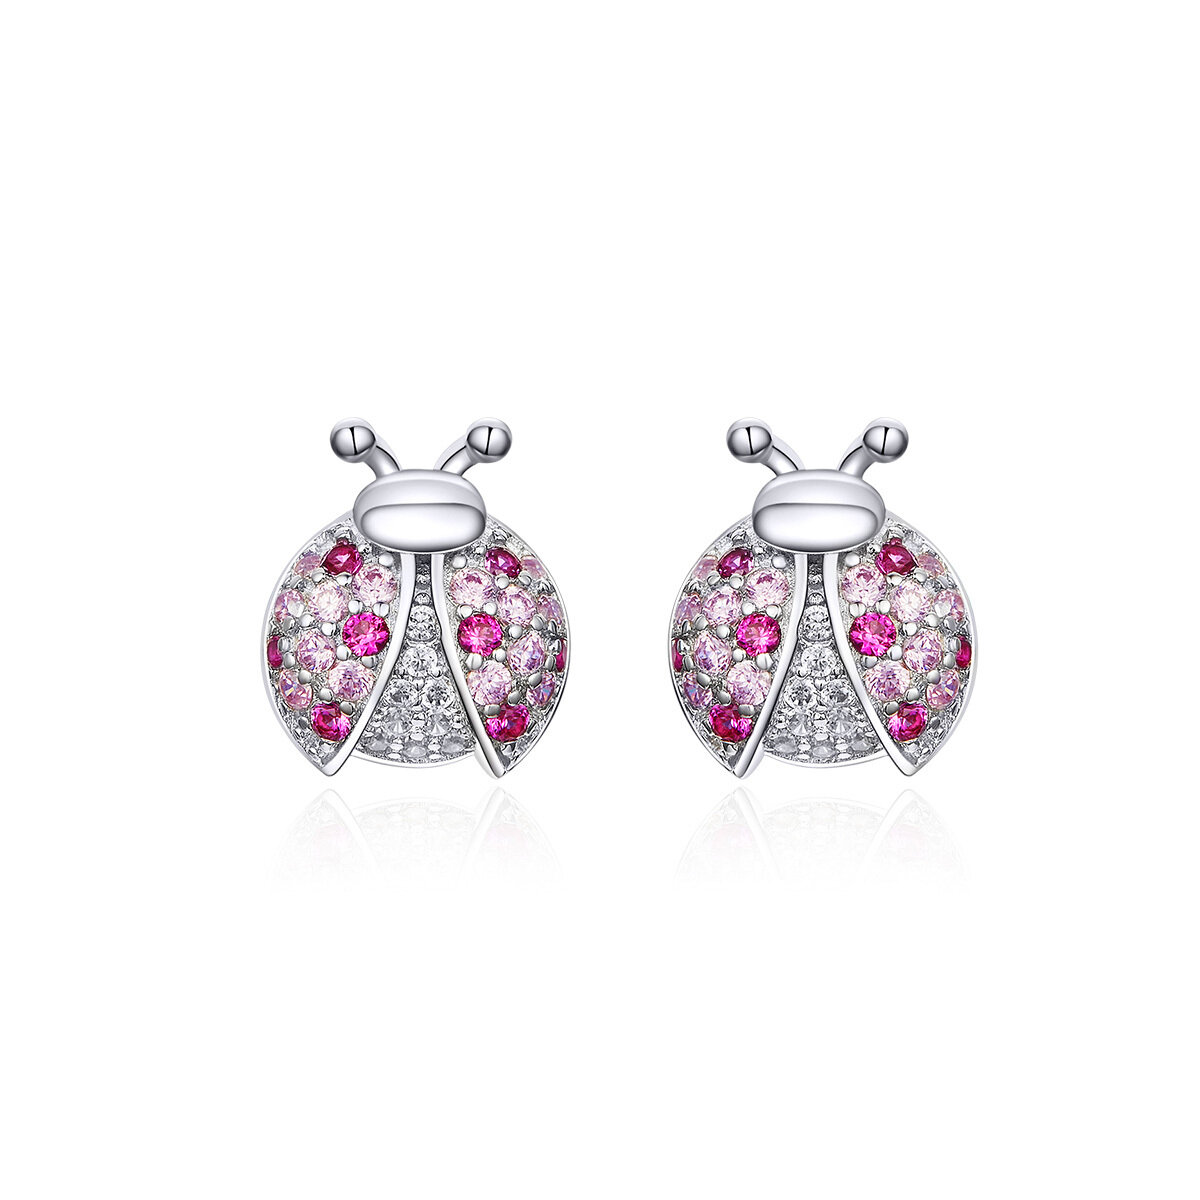 GemKing SCE715 the Ladybug S925 Sterling Silver Earring